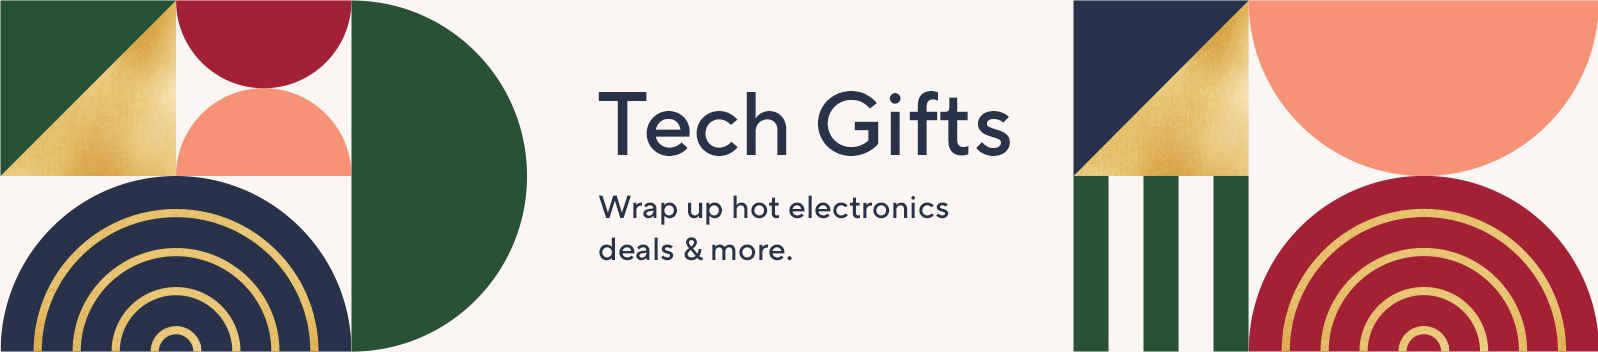 Tech Gifts. Wrap up hot electronics deals & more.